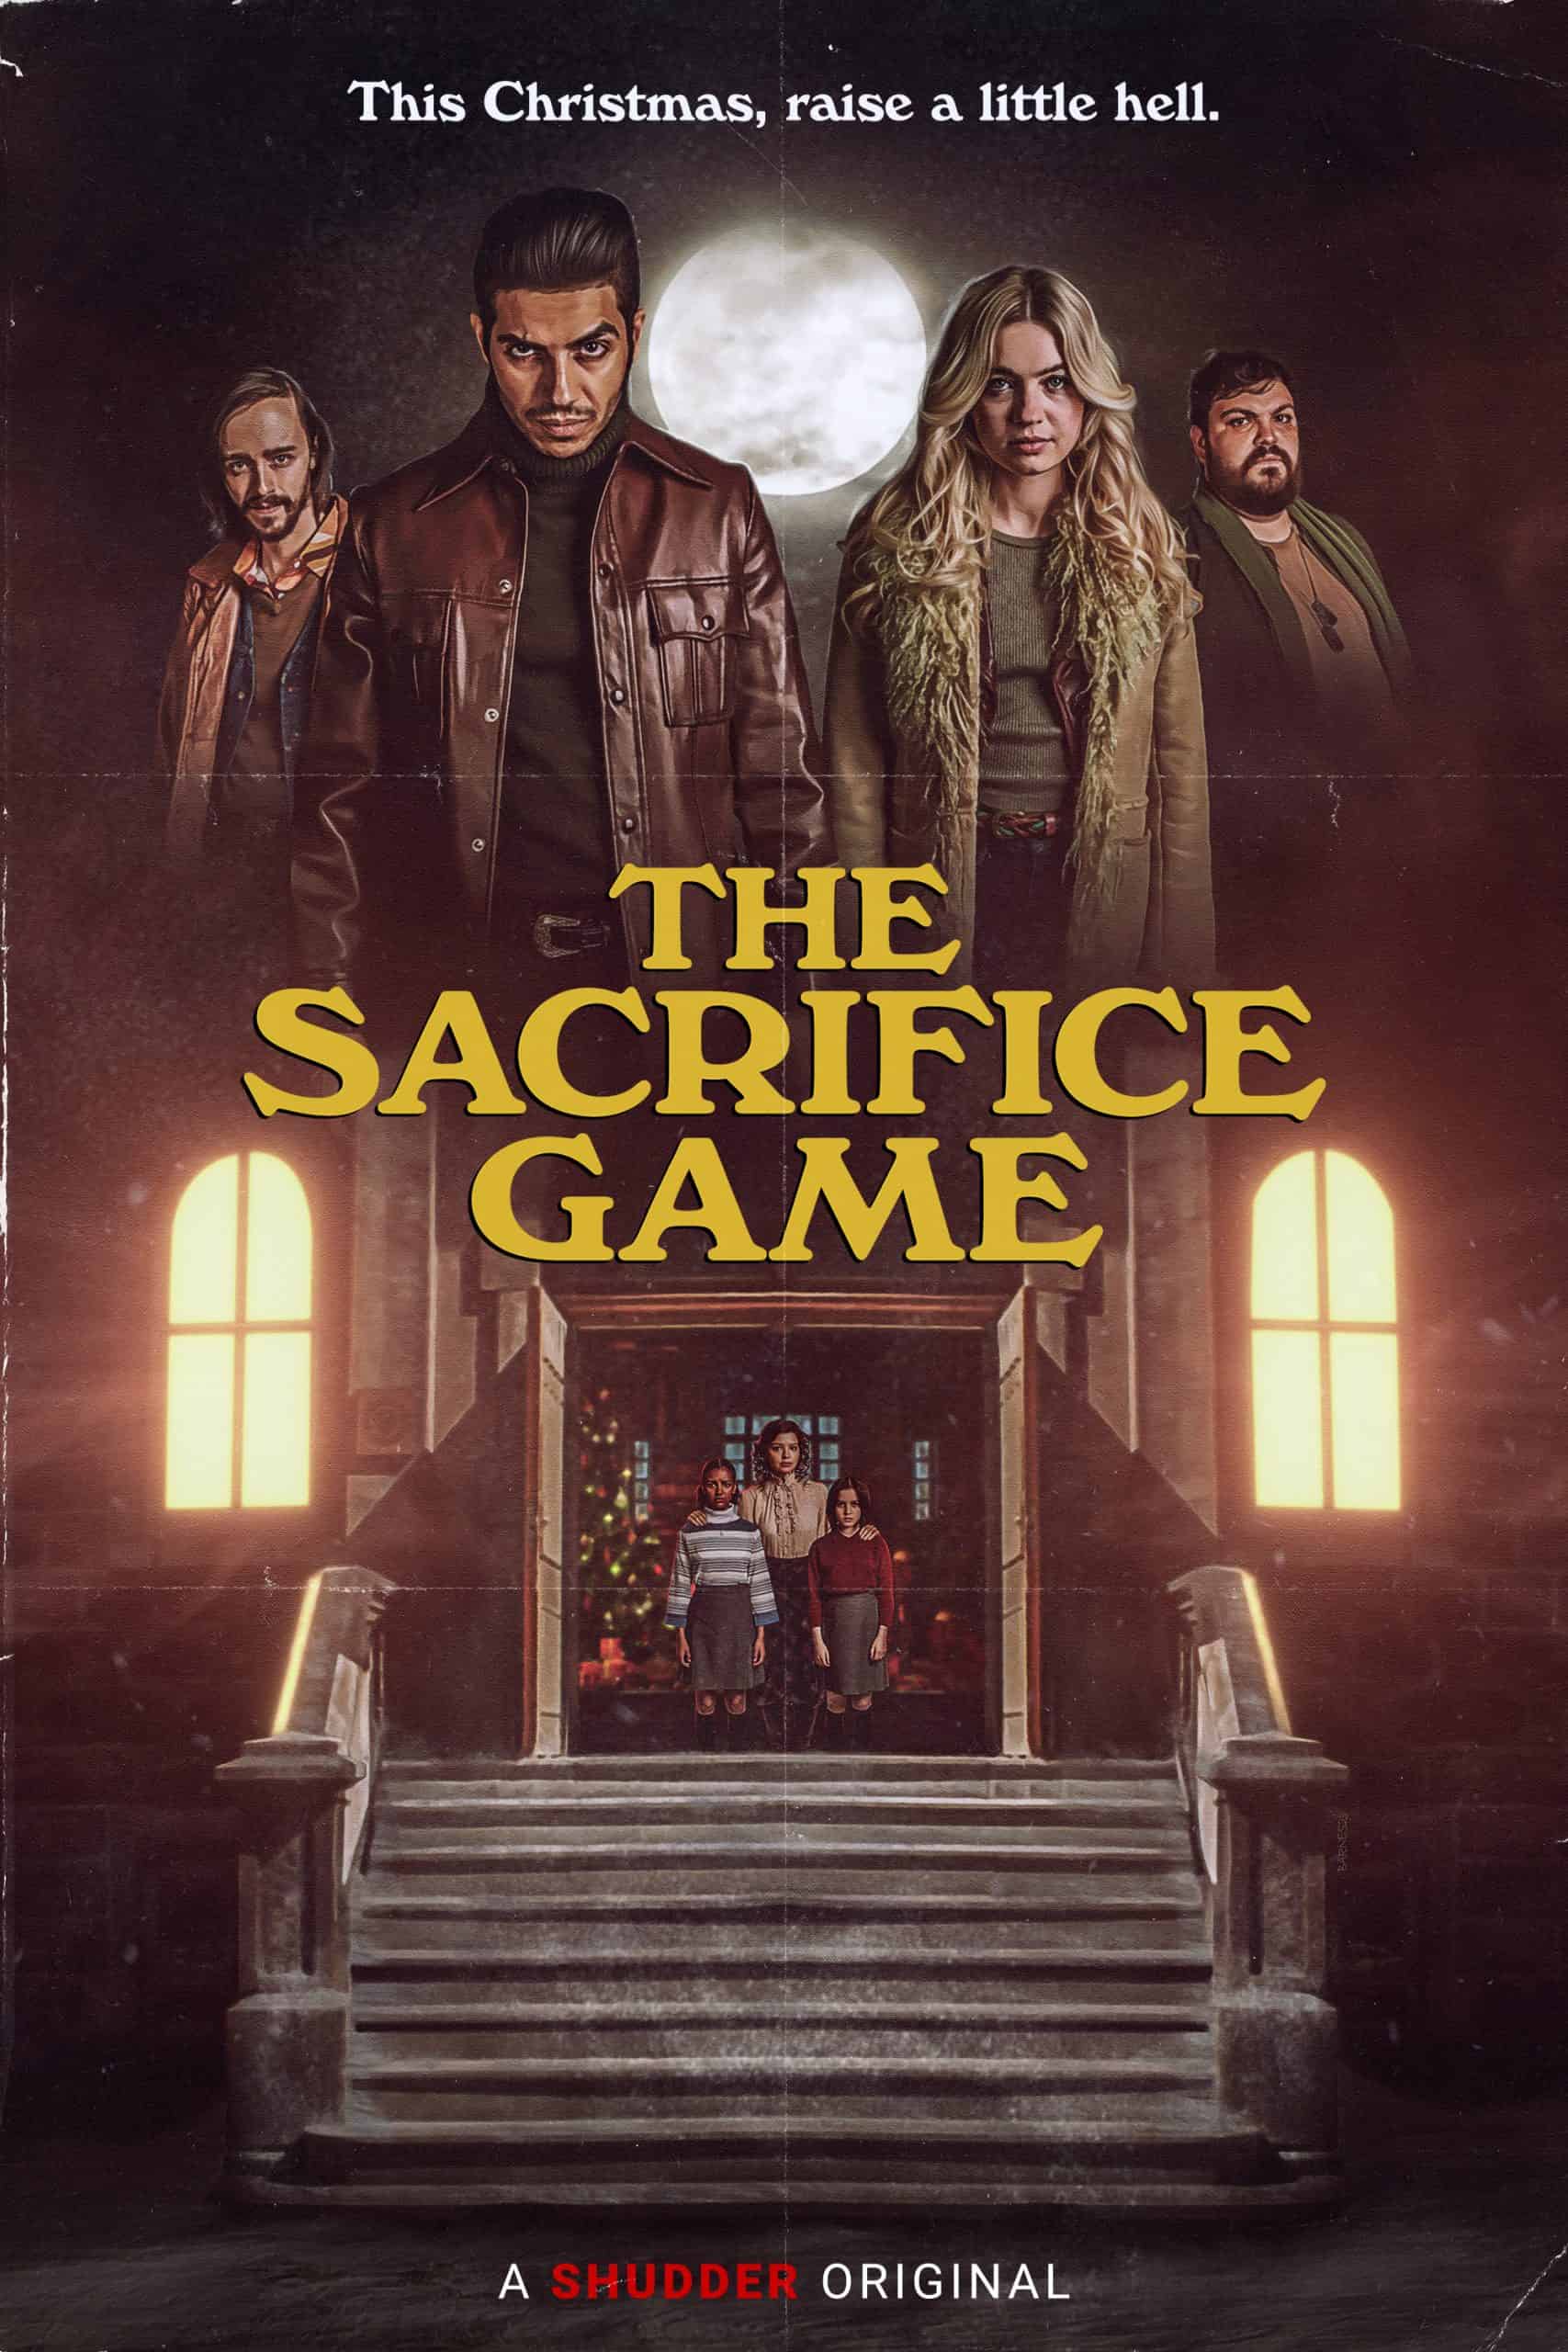 The Sacrifice Game: A Chilling Holiday Thriller Streaming on Shudder 67